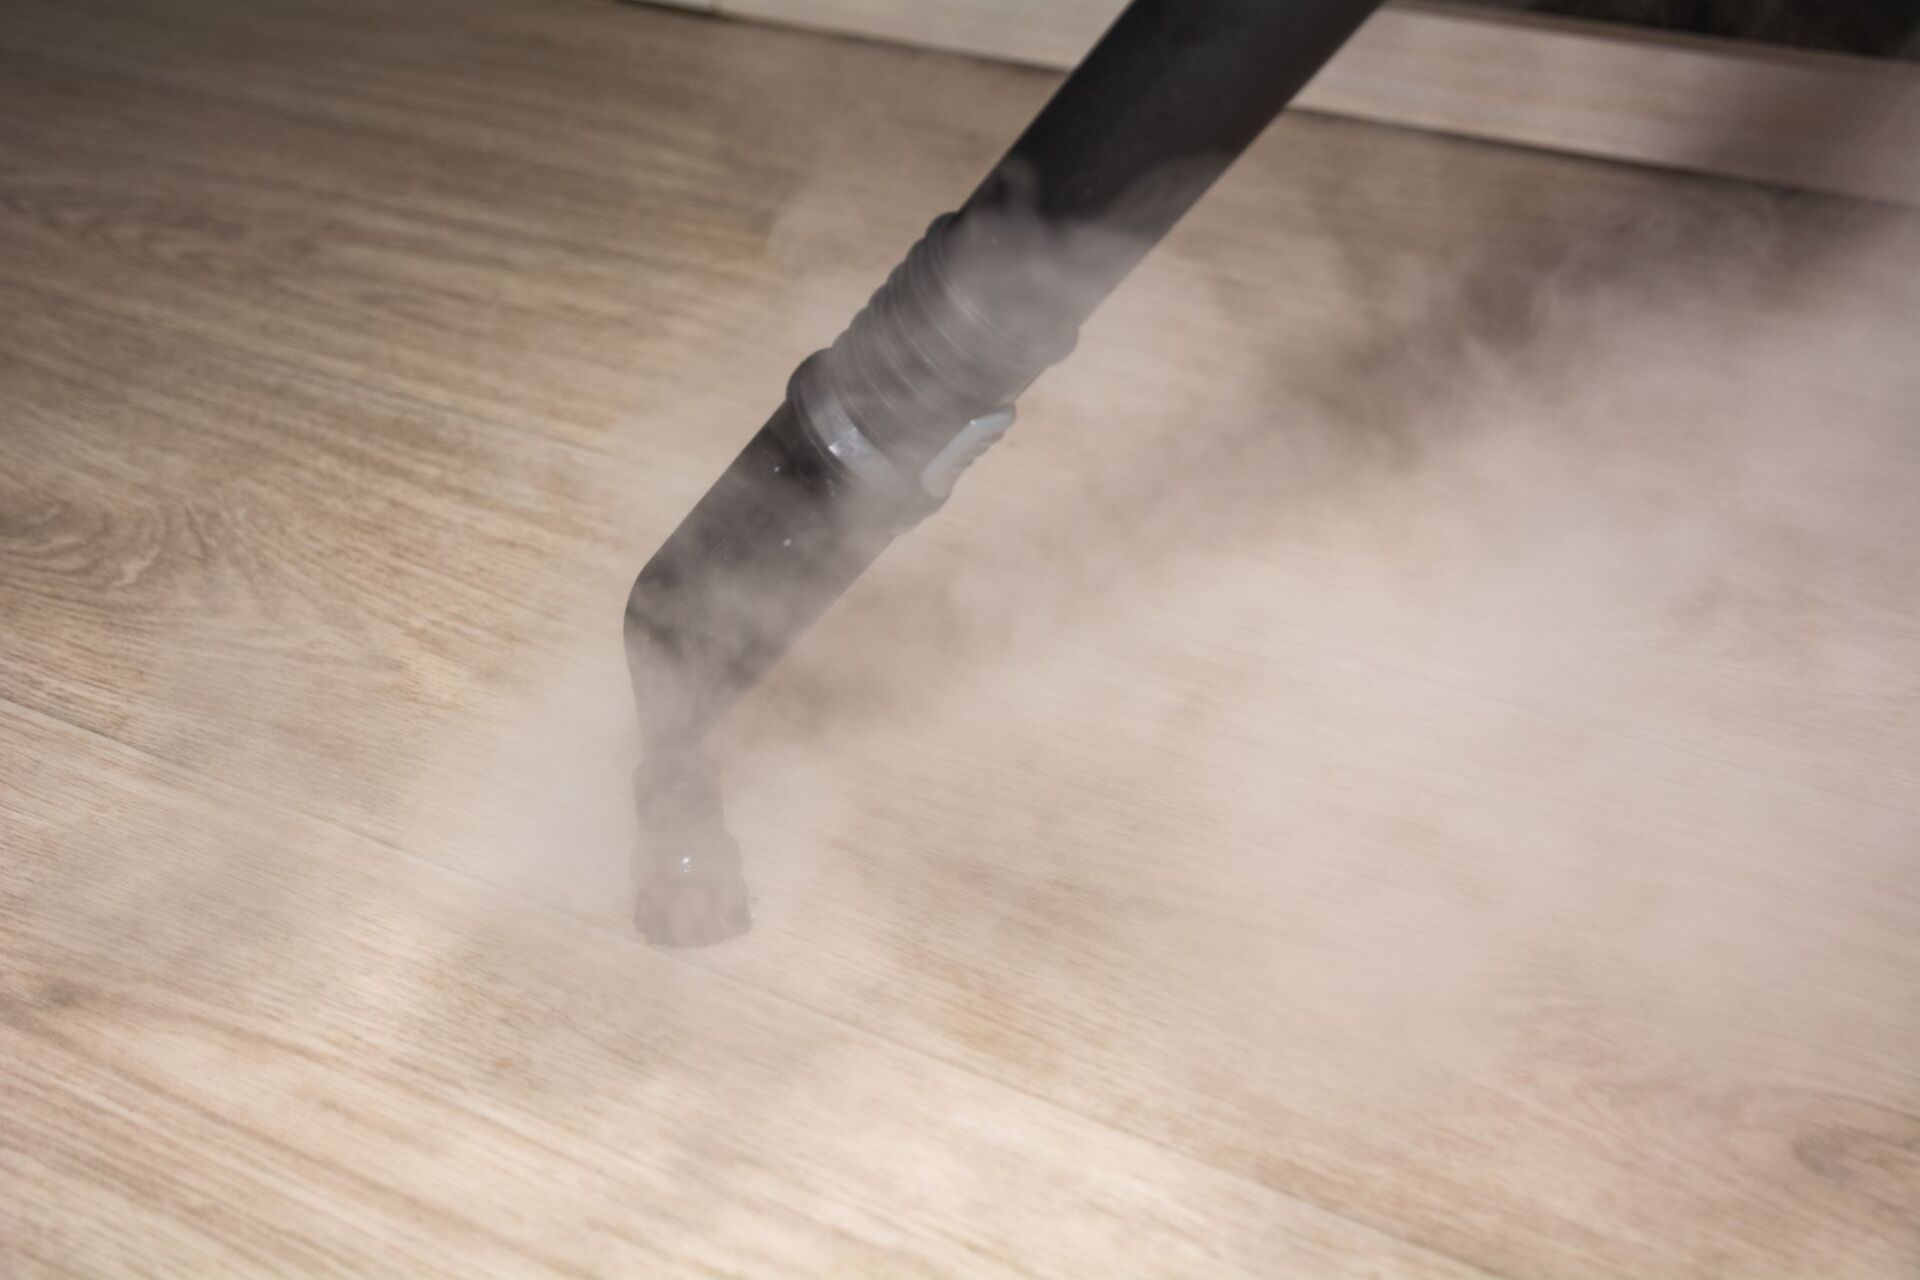 Steam Cleaning In Floor — Pest Control & Carpet Cleaning Services in Maryborough, QLD